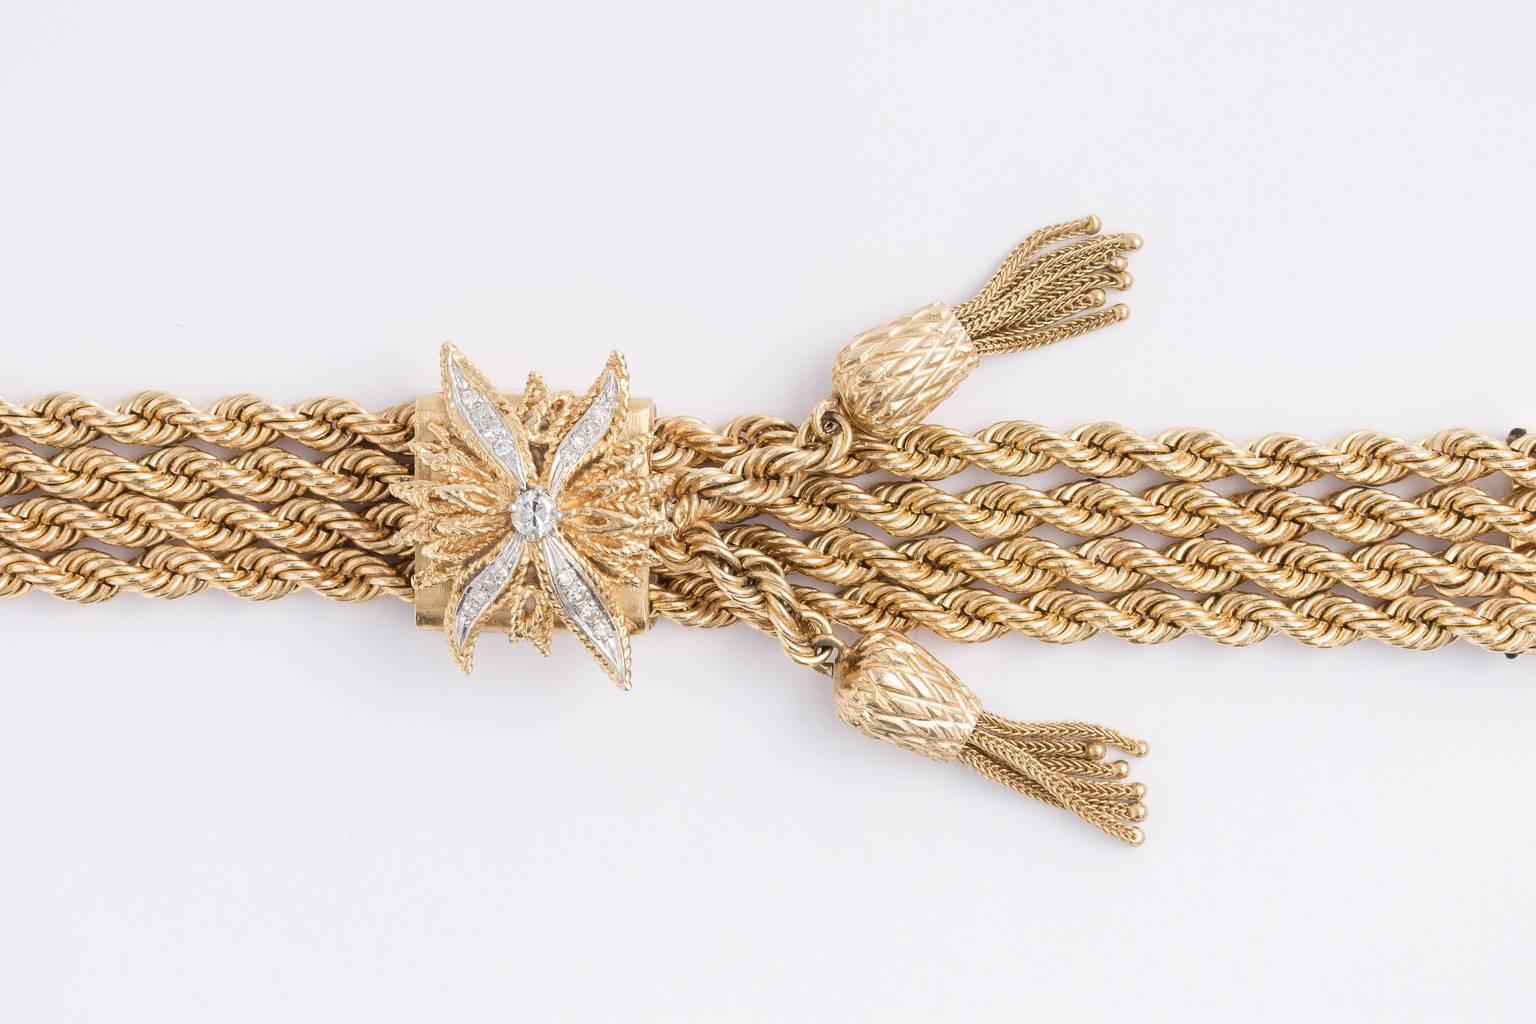 14 K gold four strand bracelet with two tassels and diamond flower on top. 32.4 dwt.- weight
PERIOD:1930-1950
